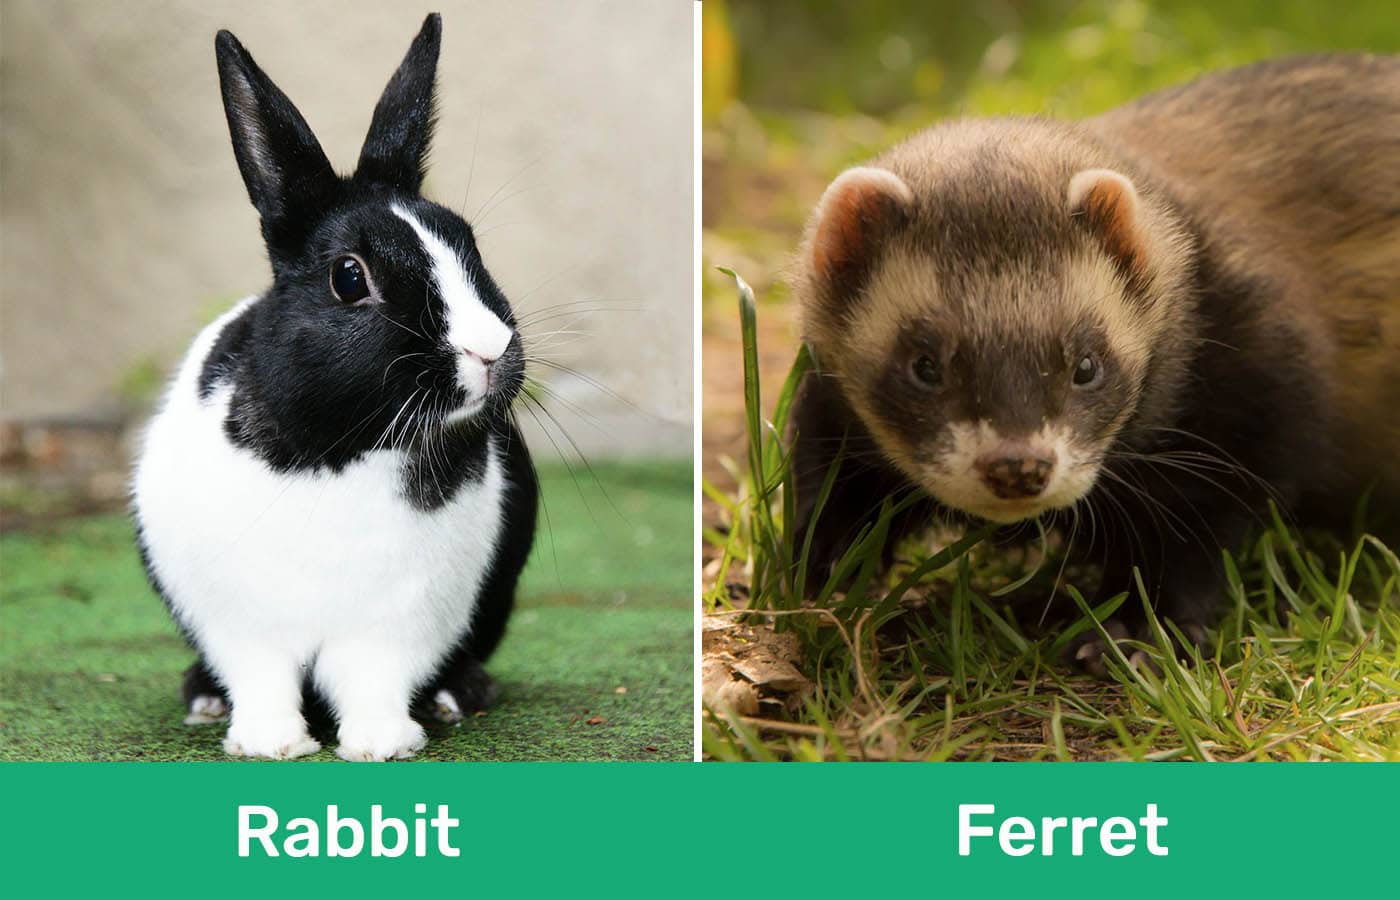 Rabbit and Ferret side by side